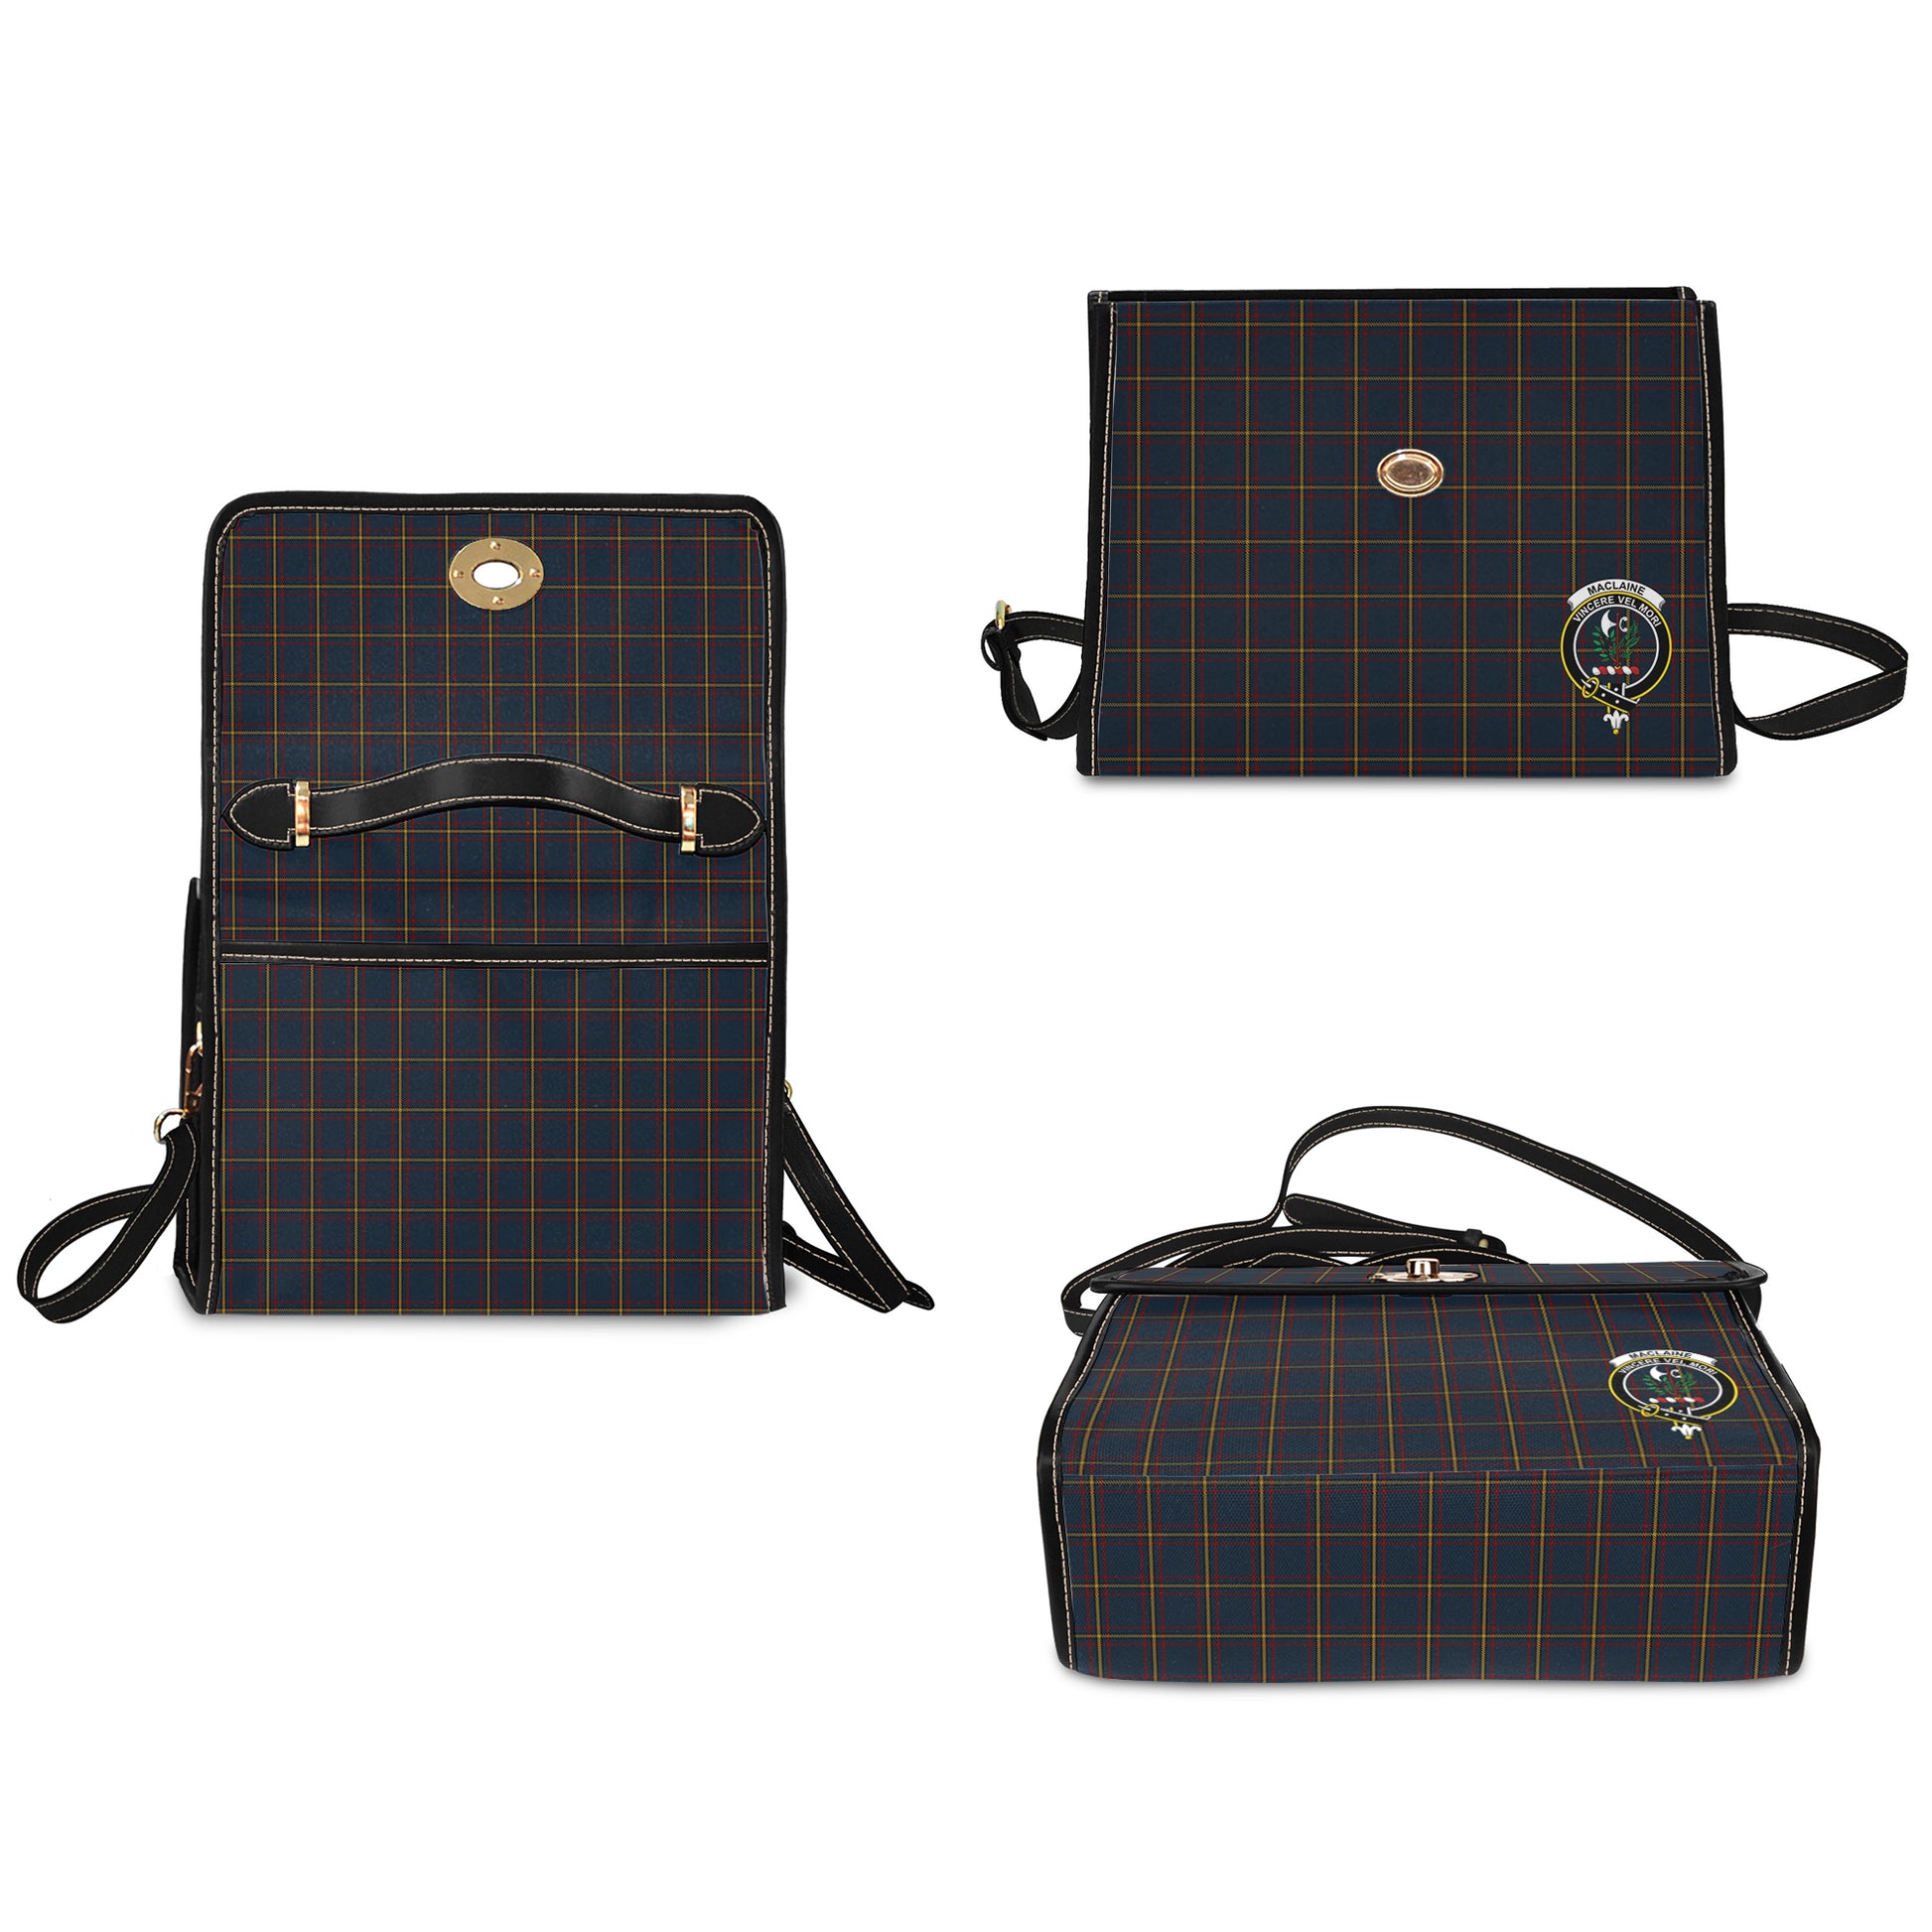 maclaine-of-lochbuie-hunting-tartan-leather-strap-waterproof-canvas-bag-with-family-crest